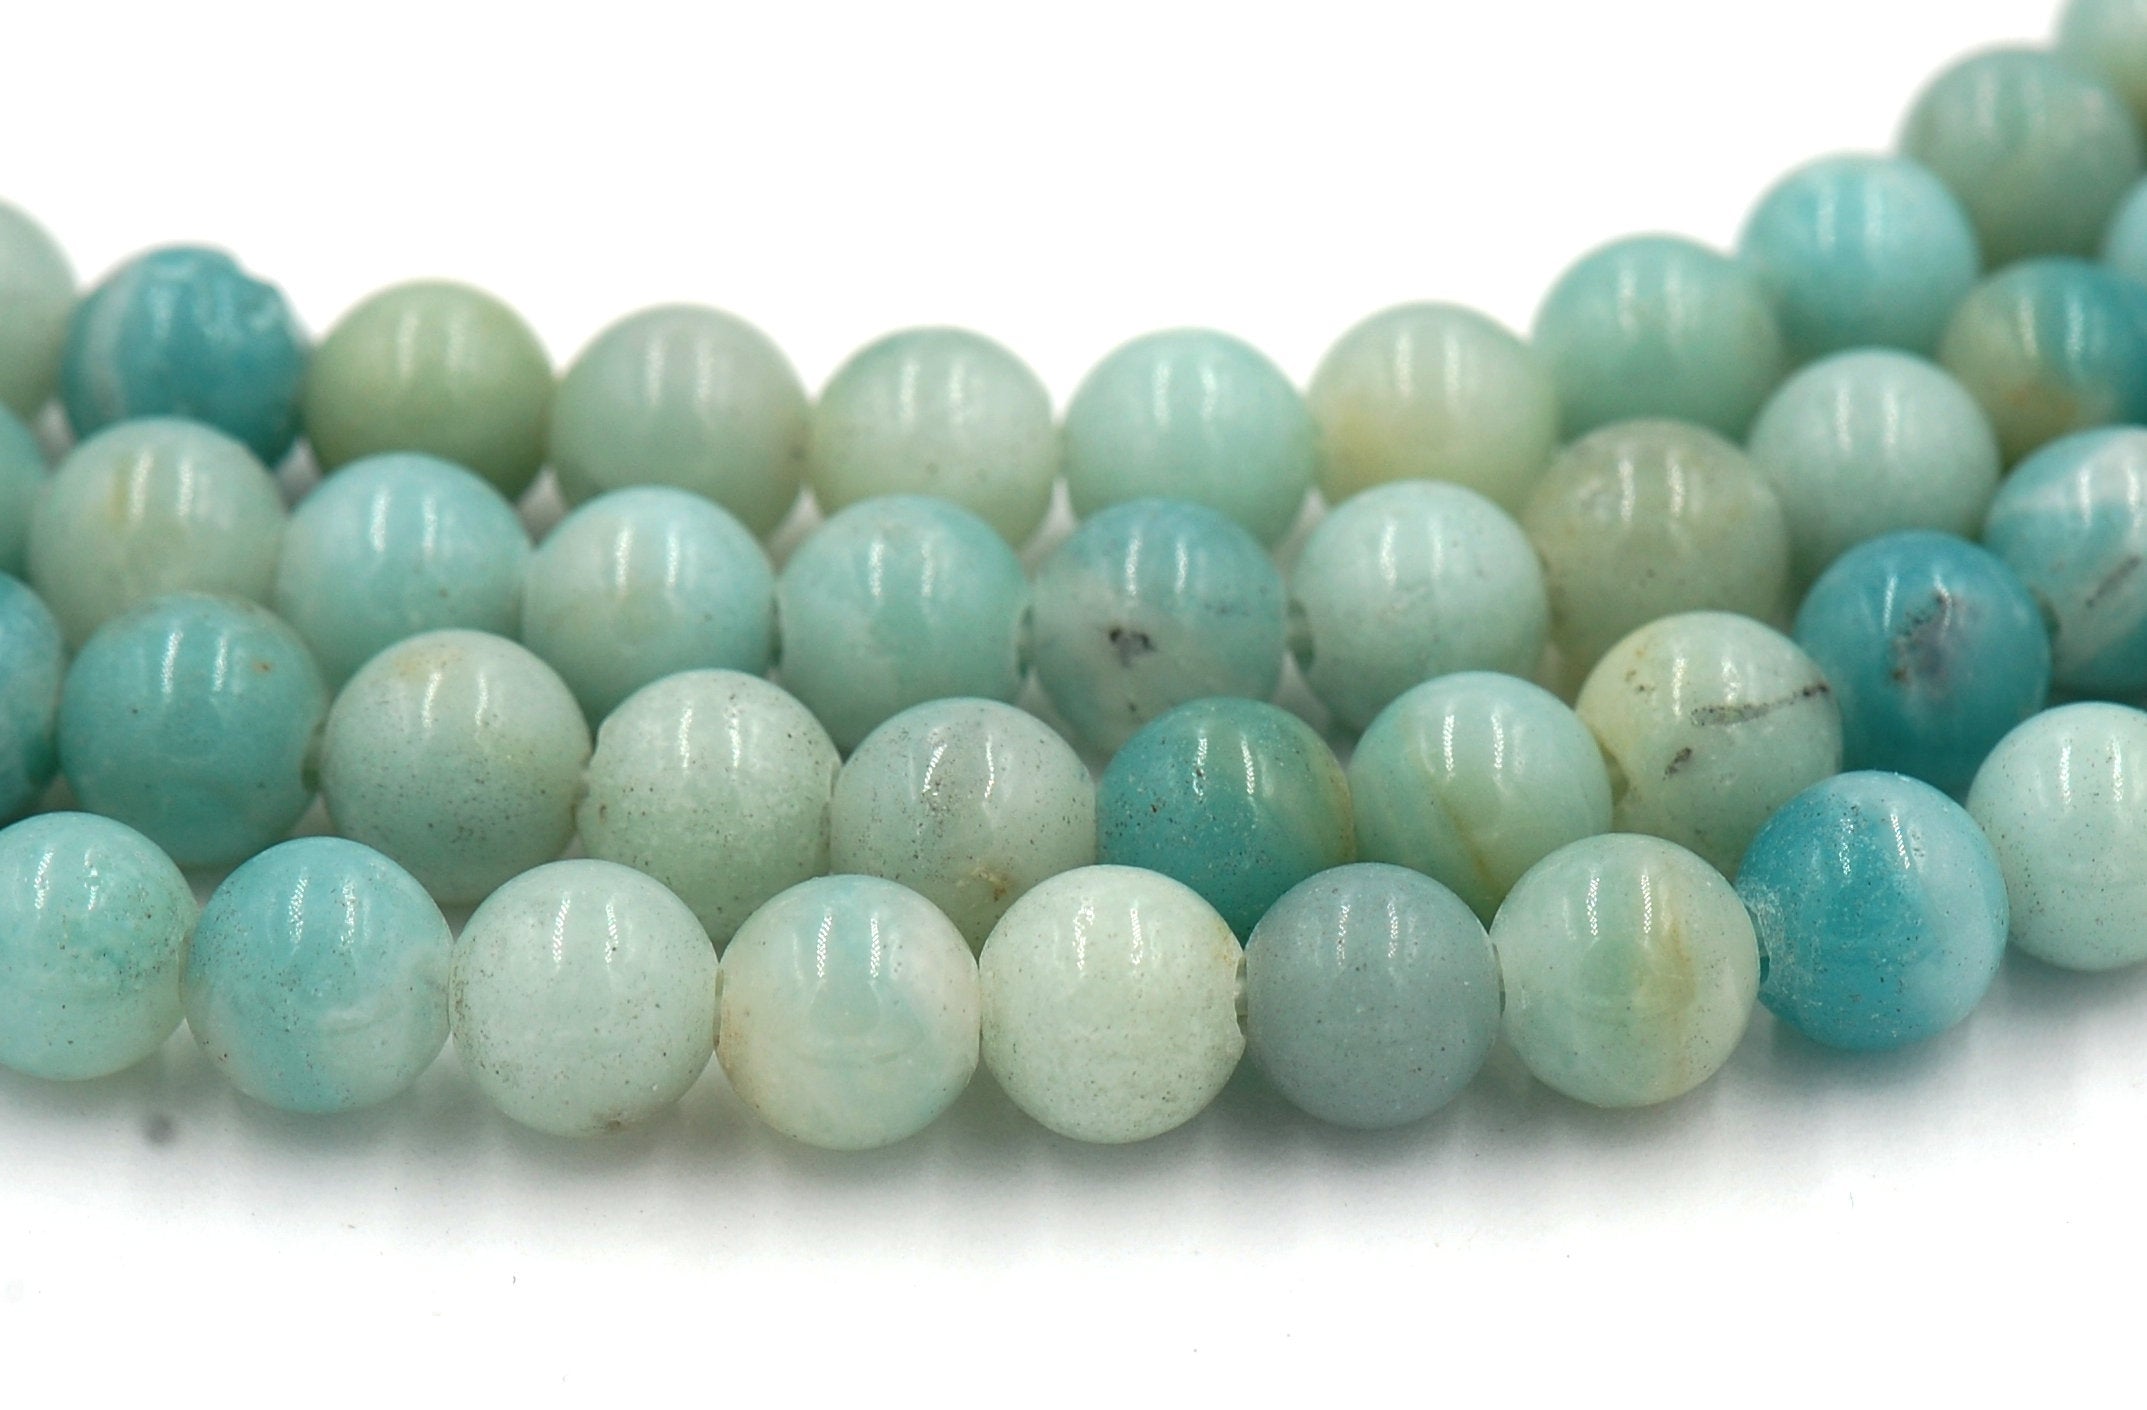 Large Hole Amazonite Blue Green 6mm, 8mm, 10mm, 12mm Round Beads -14.75 inch strand